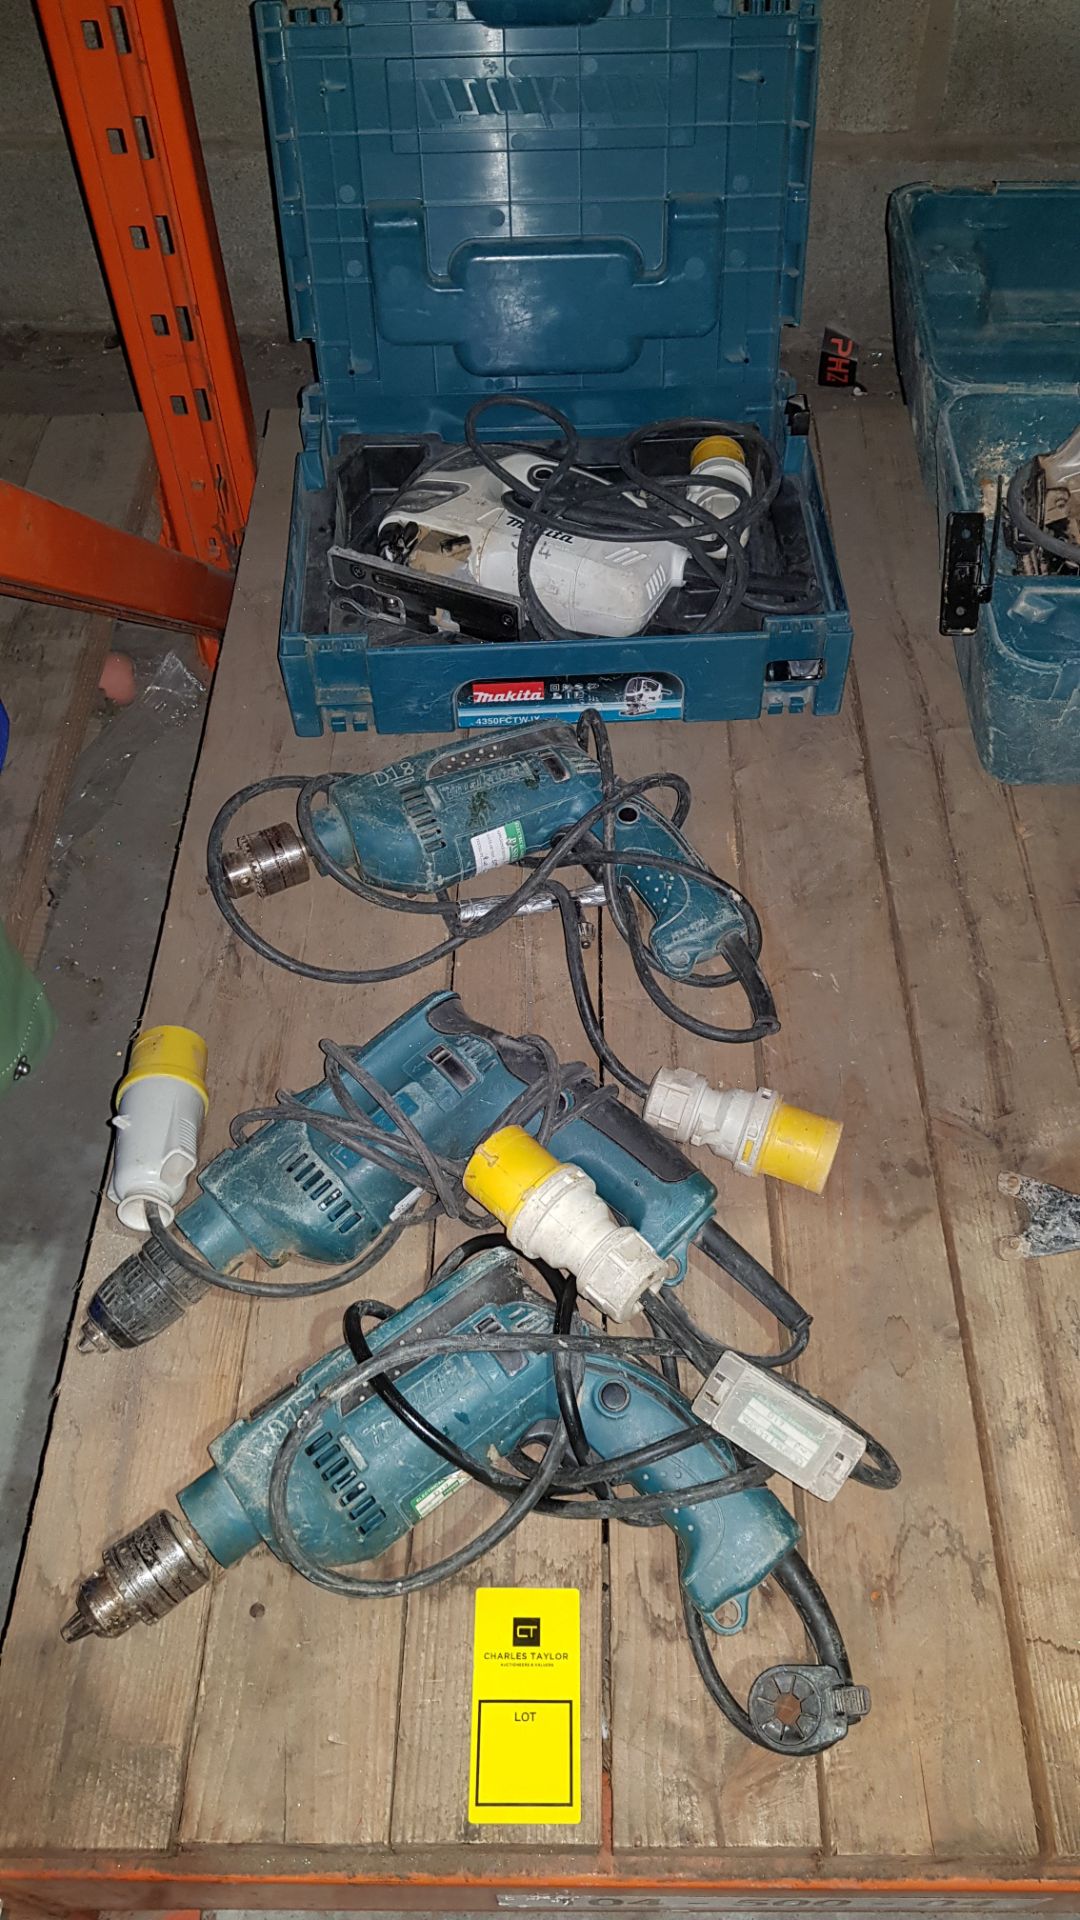 4 PIECE MIXED TOOL LOT CONTAINING 3 X MAKITA SDS DRILLS - NO CASES AND 1 X MAKITA JIG SAW - INCLUDES